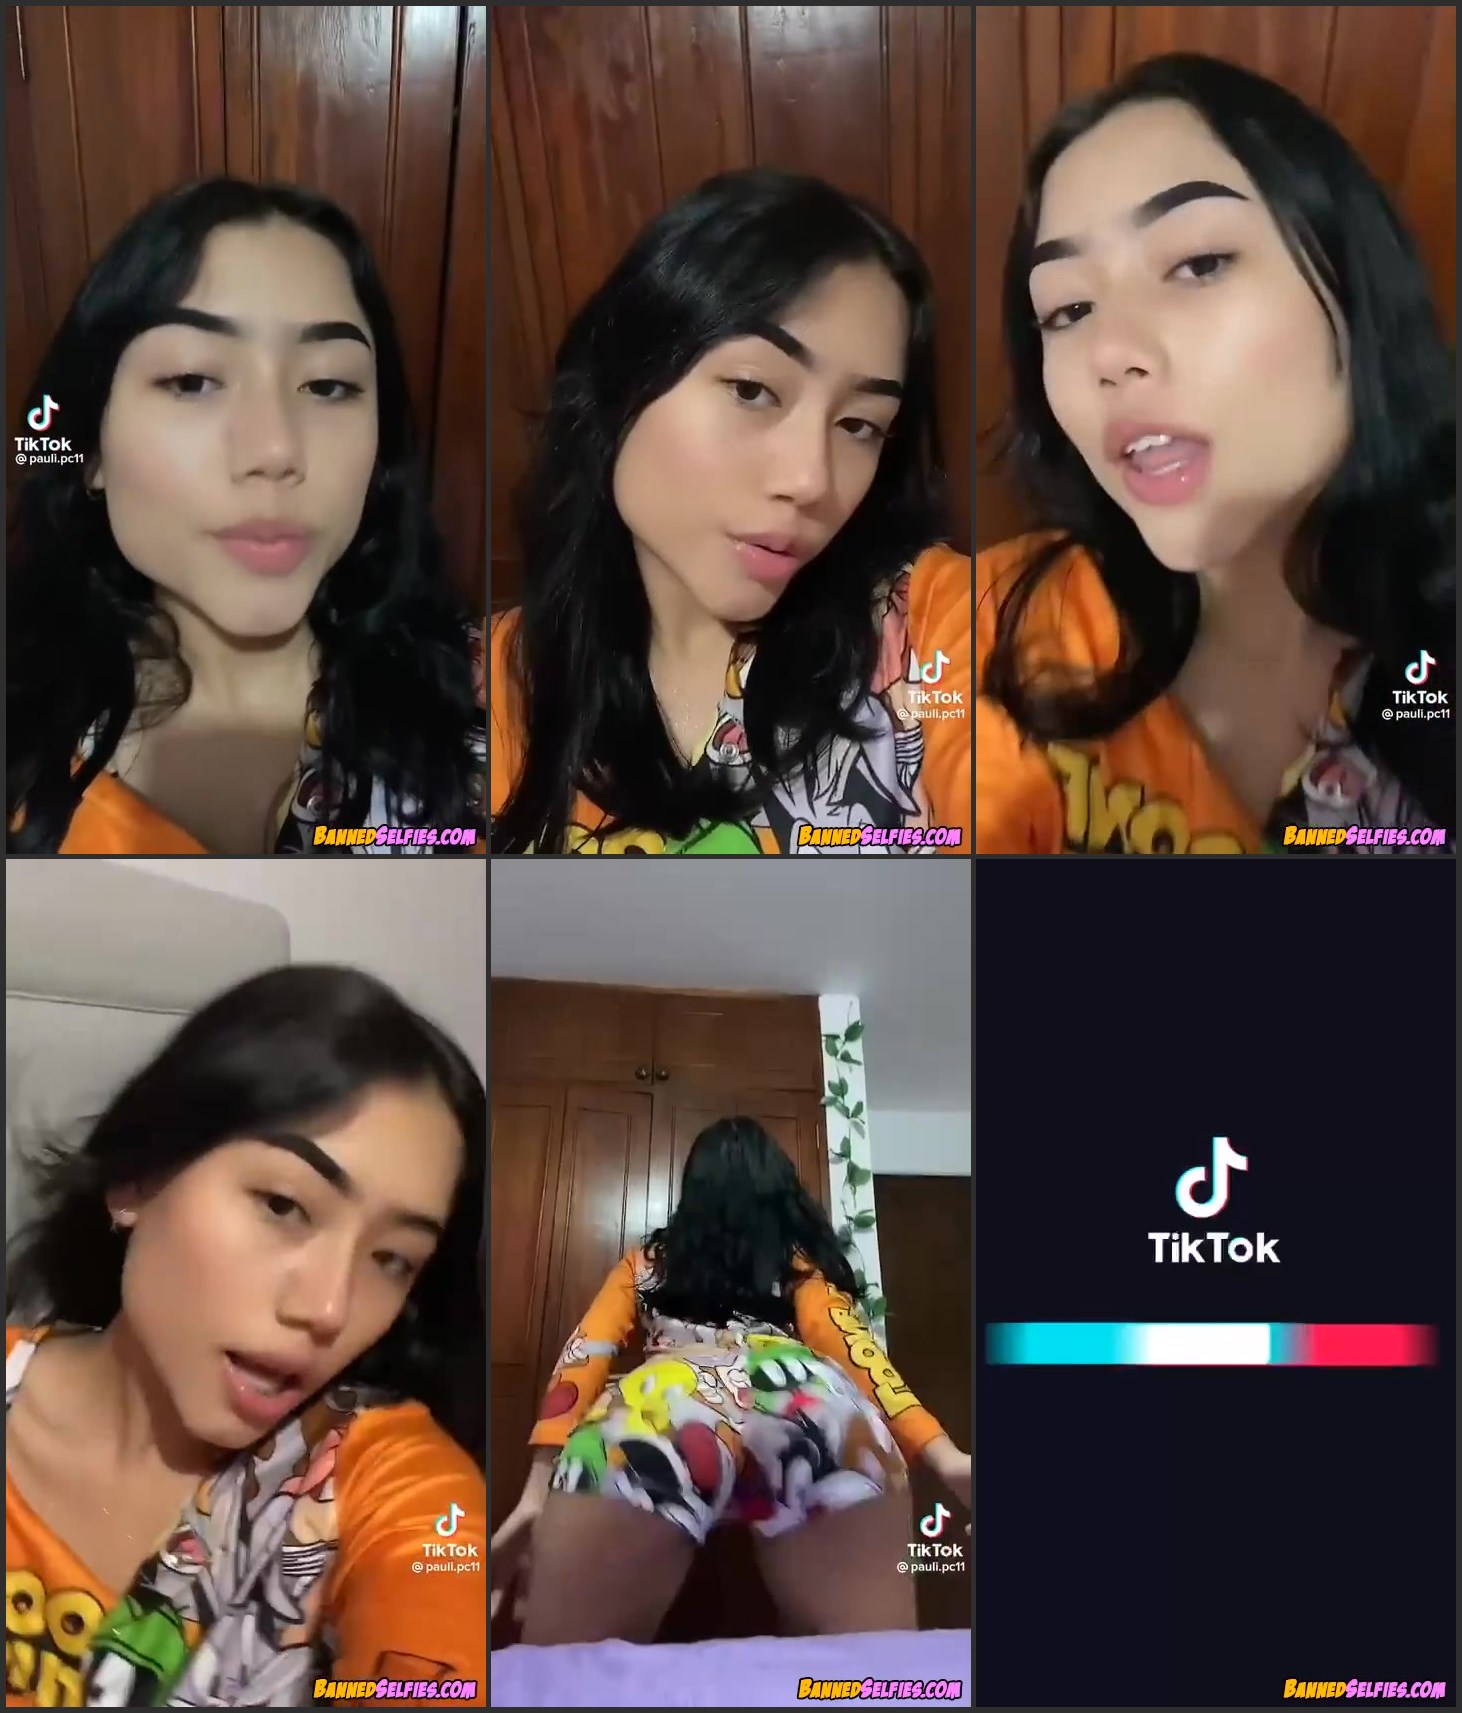 Nathaly College Girl Strips And Shows On Tiktok Bannedselfies